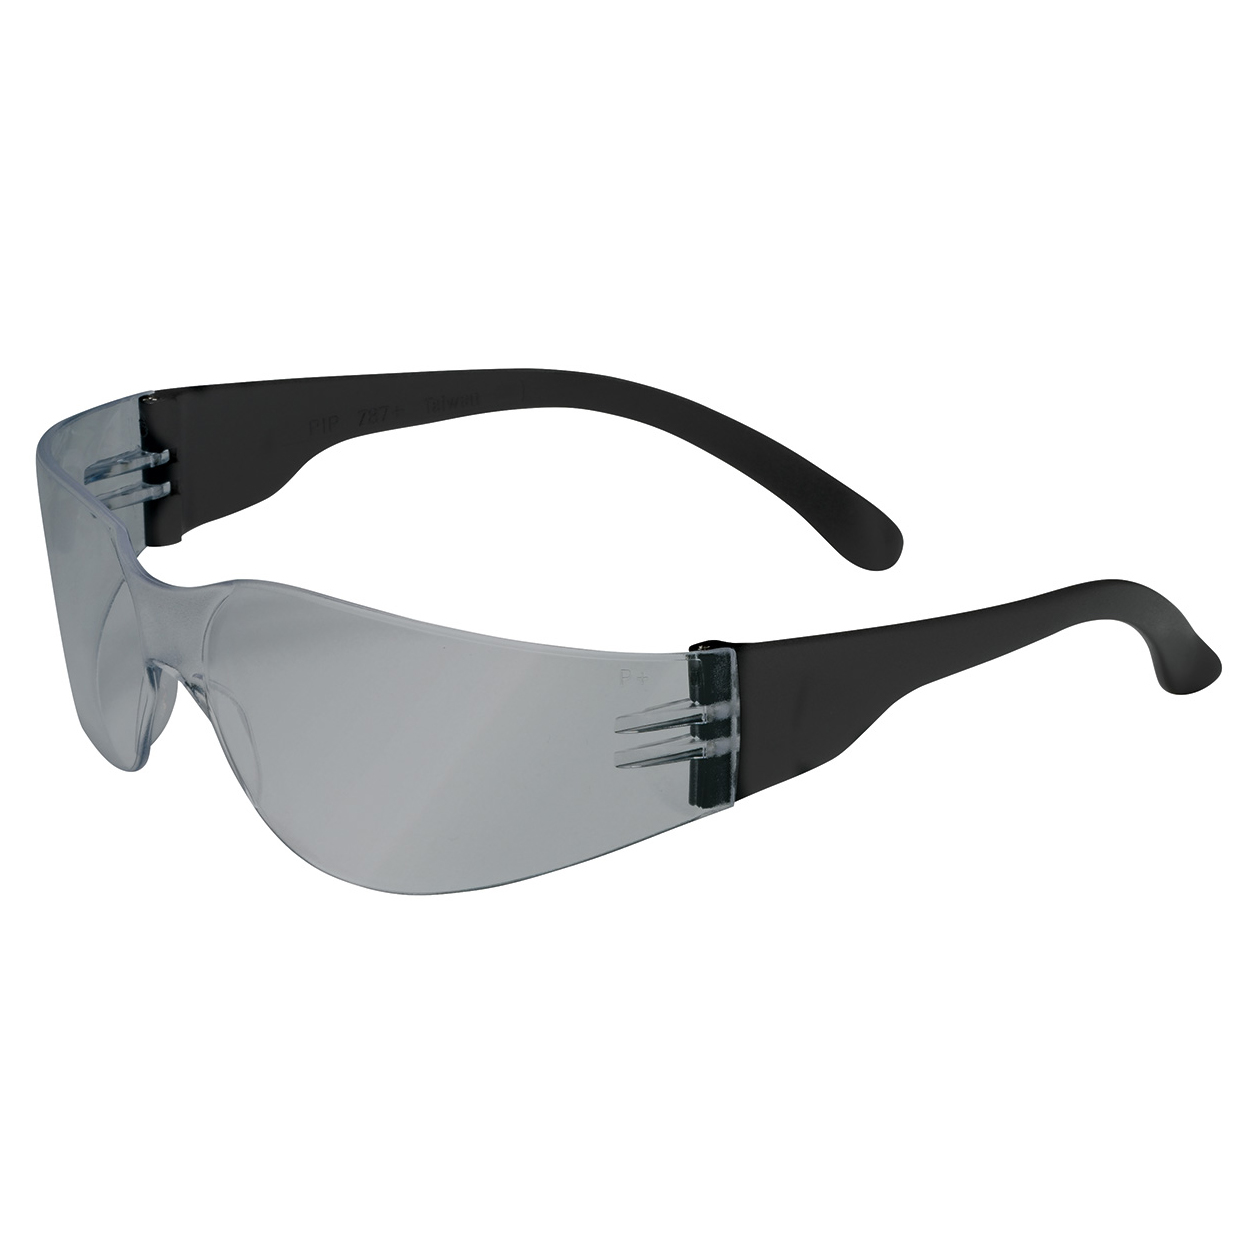 Bouton Zenon Z12 Safety Glasses with Mirror Lens and Black Temple from Columbia Safety